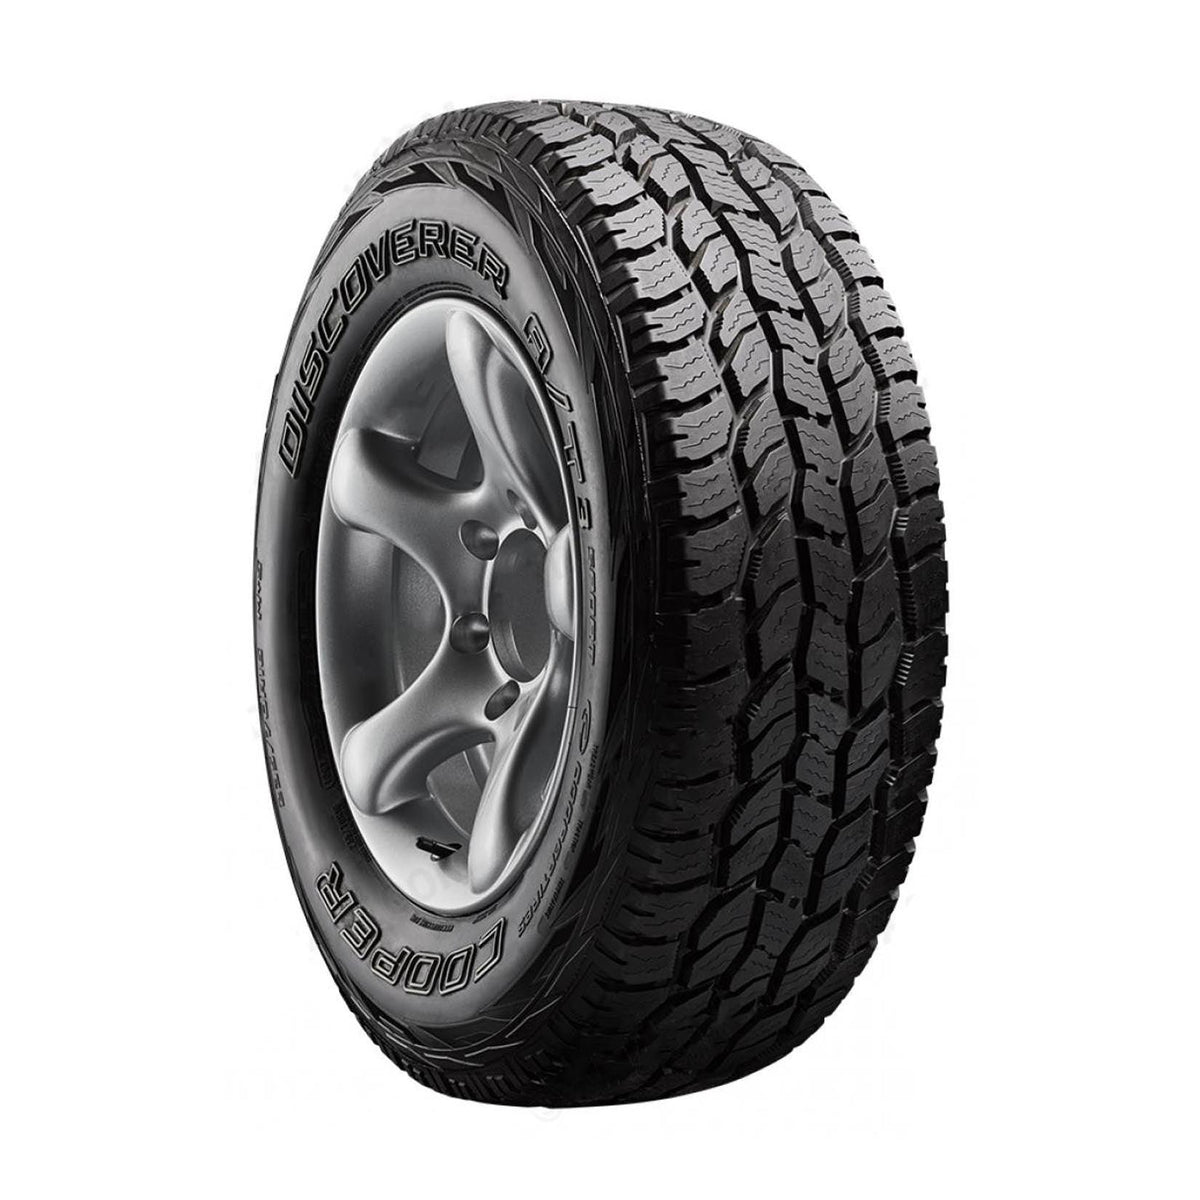 COOPER DISCOVERER AT3 SPORT - ALL TERRAIN TYRES - 285/50/20 - QTY 1 - Storm Xccessories2